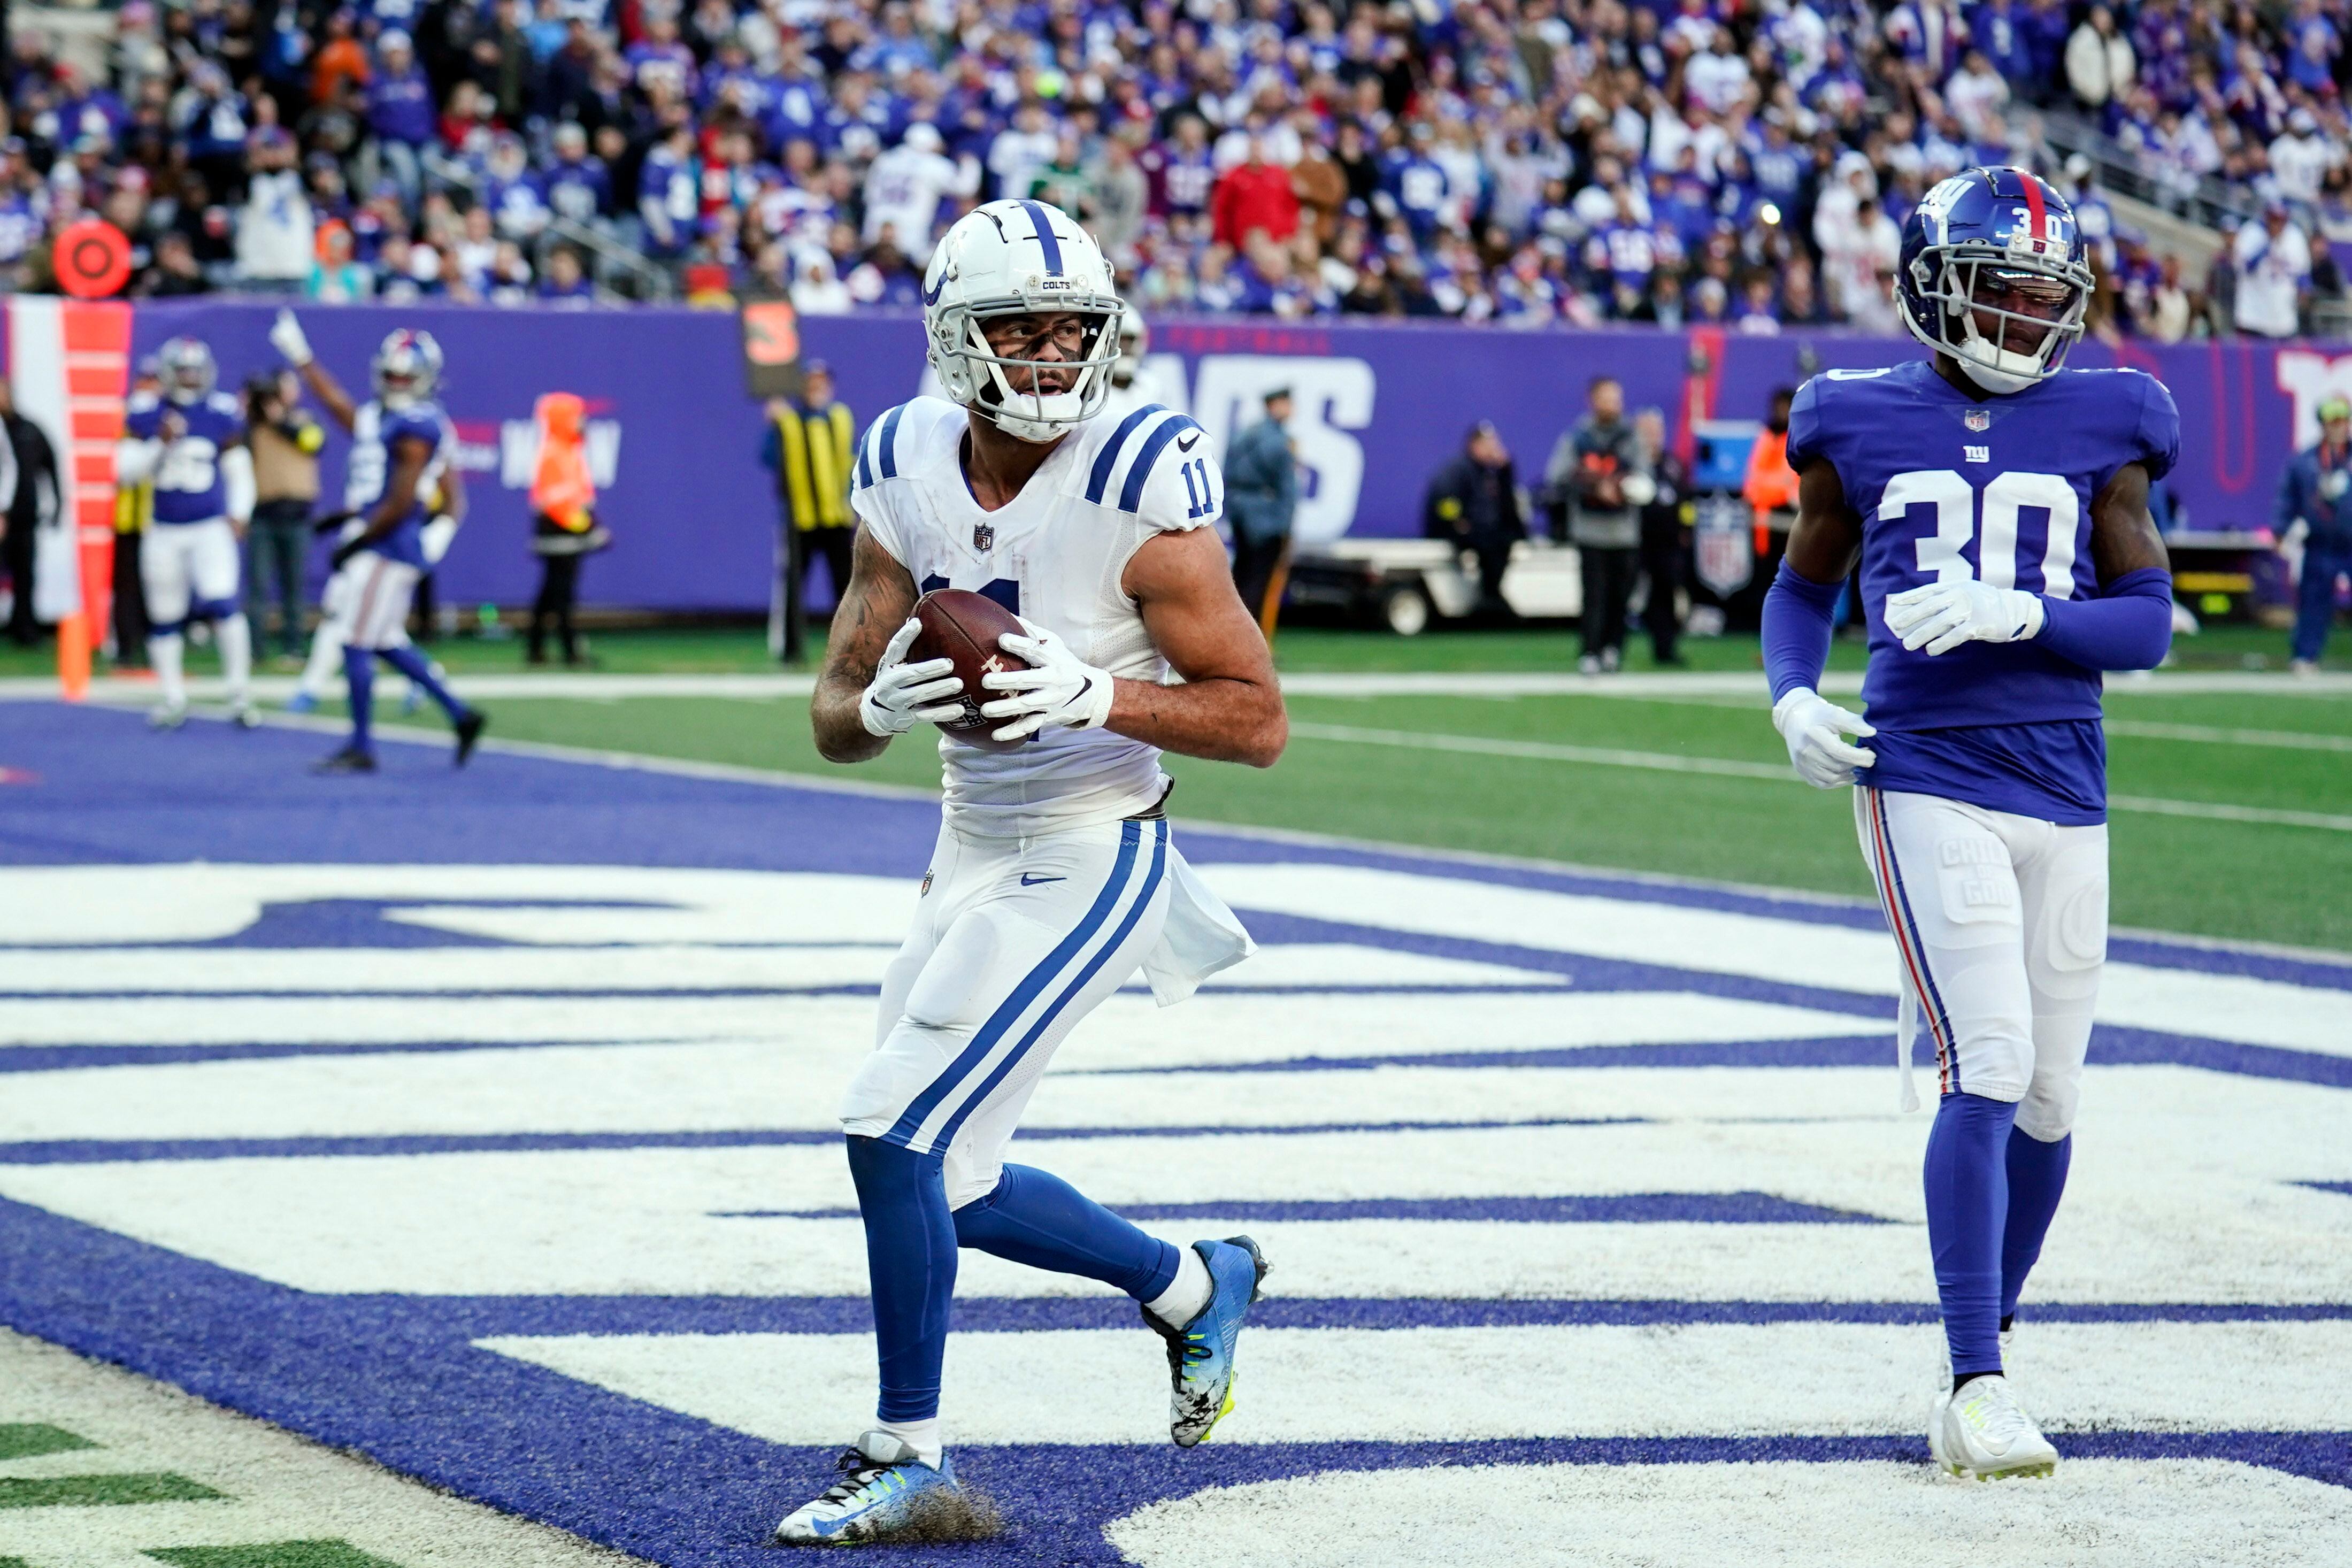 Colts routed by Giants, 38-10